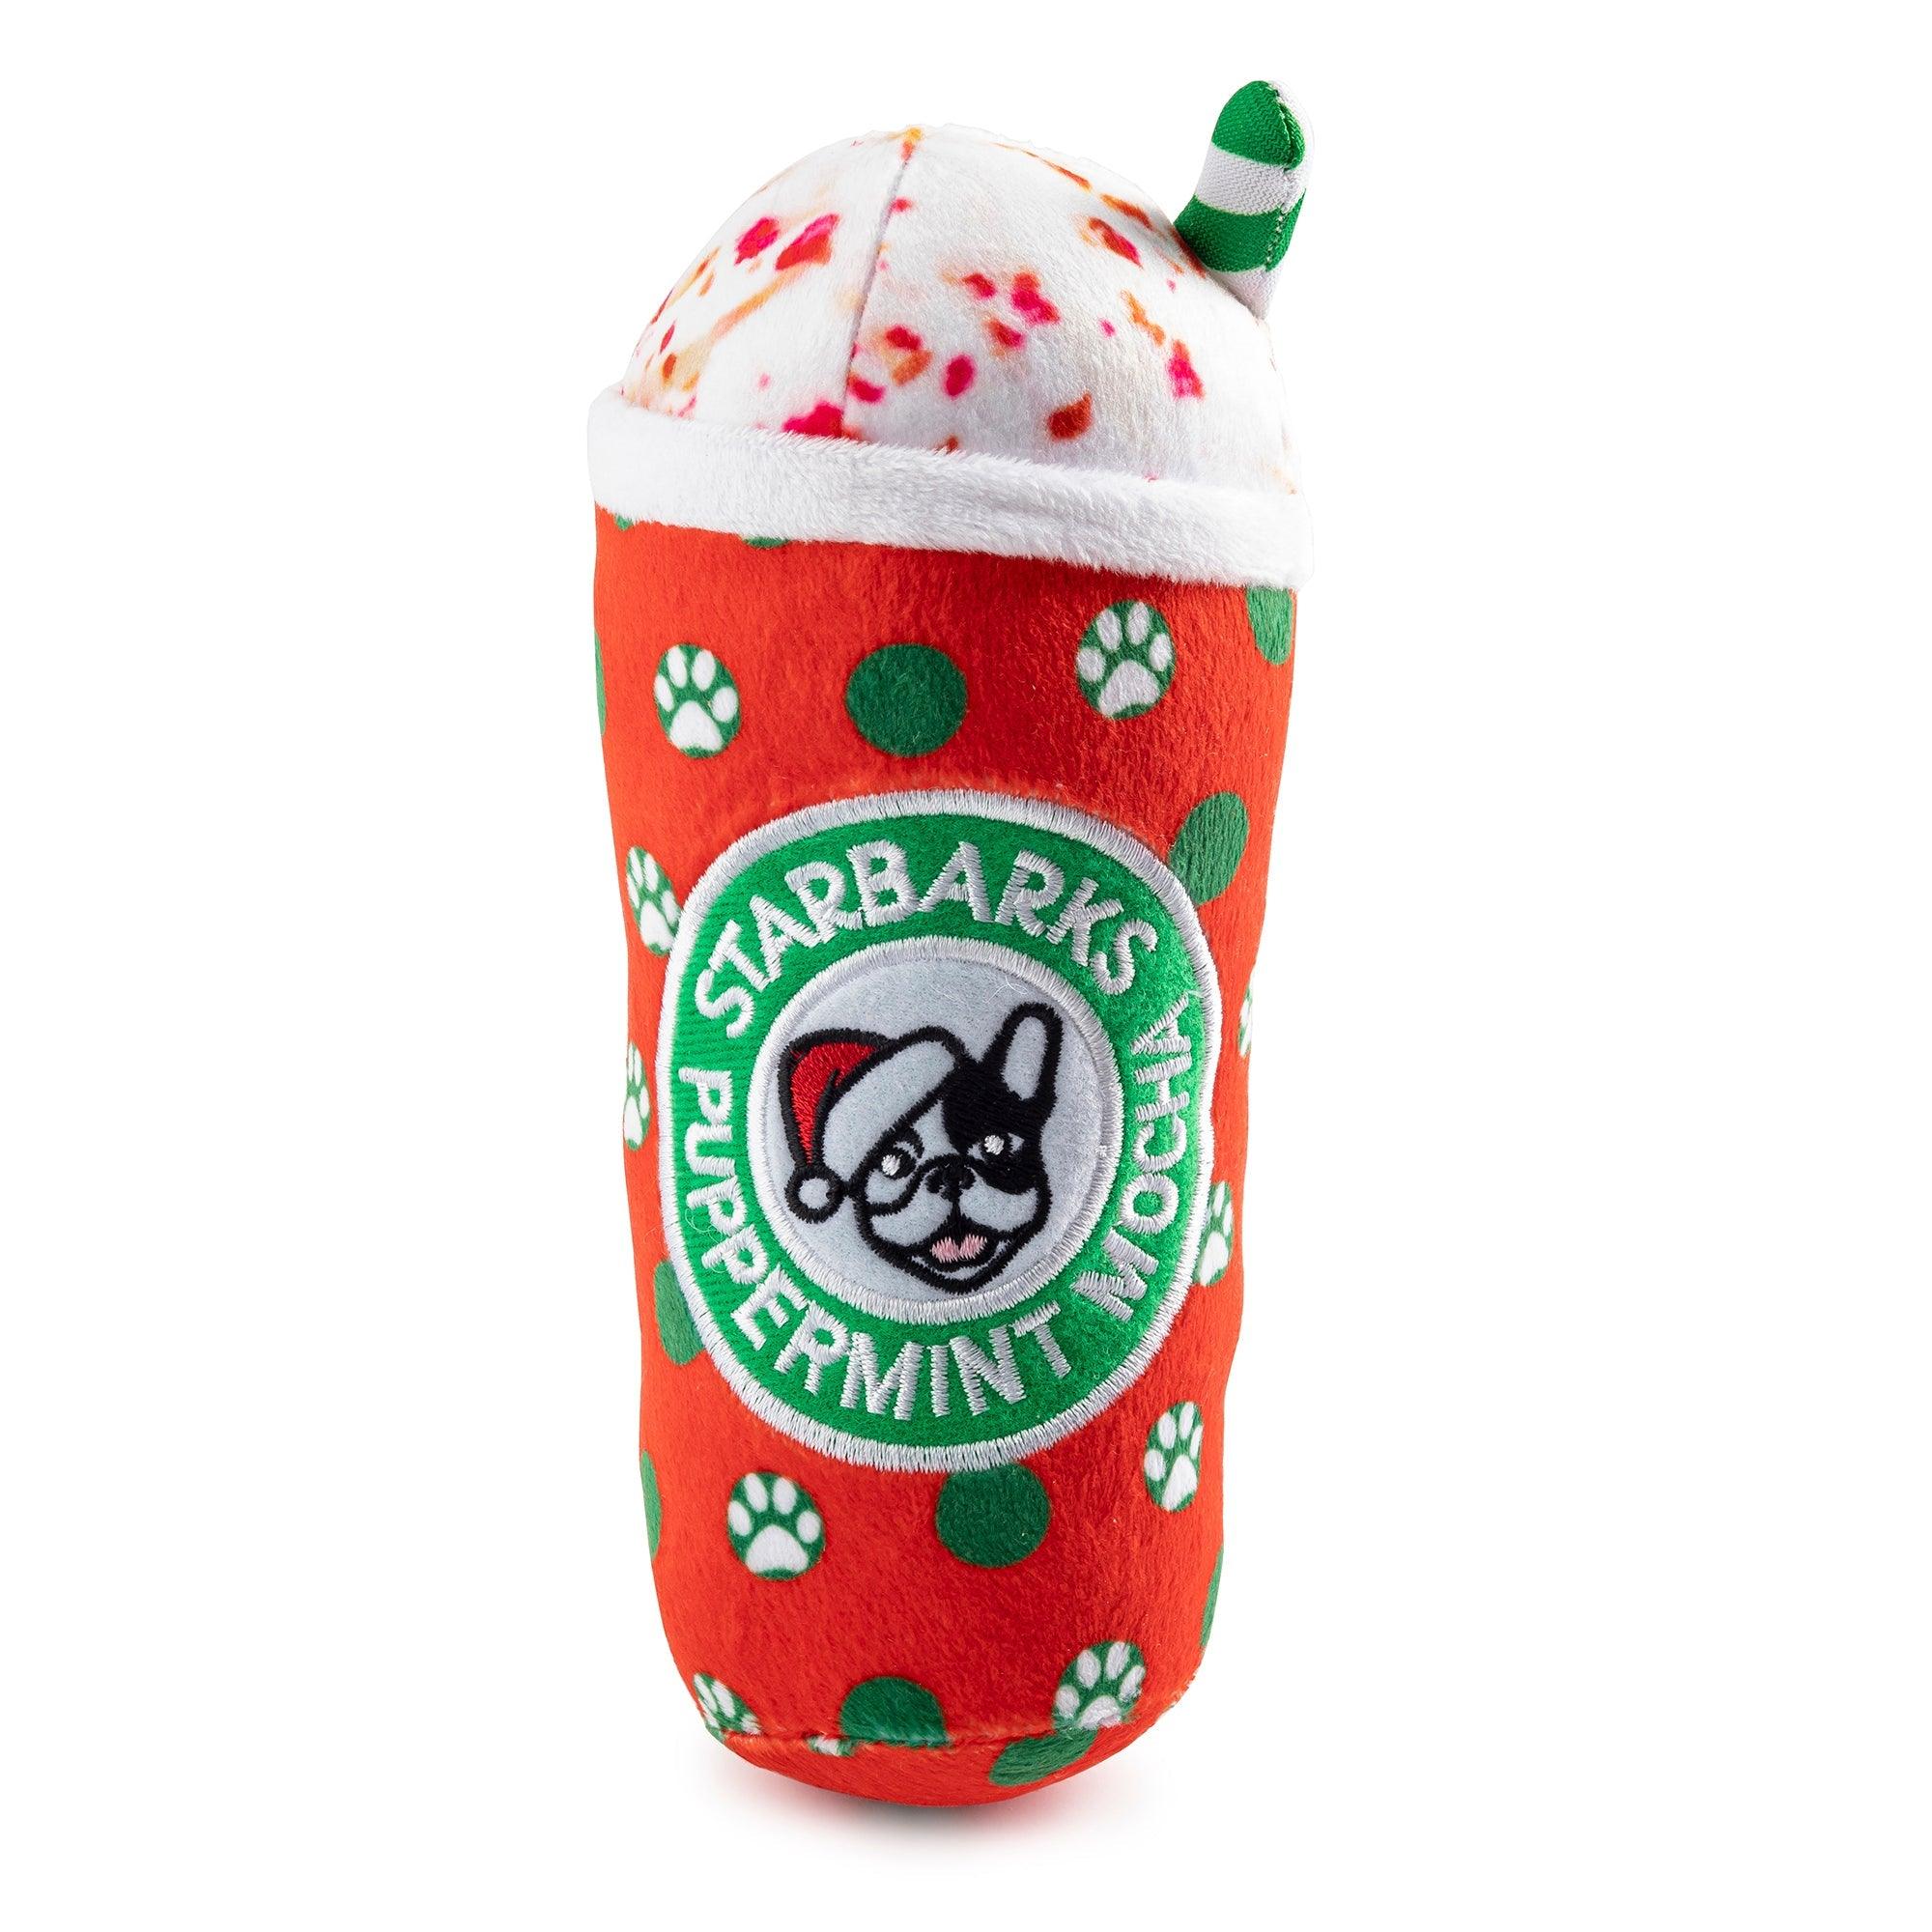 Starbarks Puppermint Mocha - Holiday Dots Cup - Rocky & Maggie's Pet Boutique and Salon